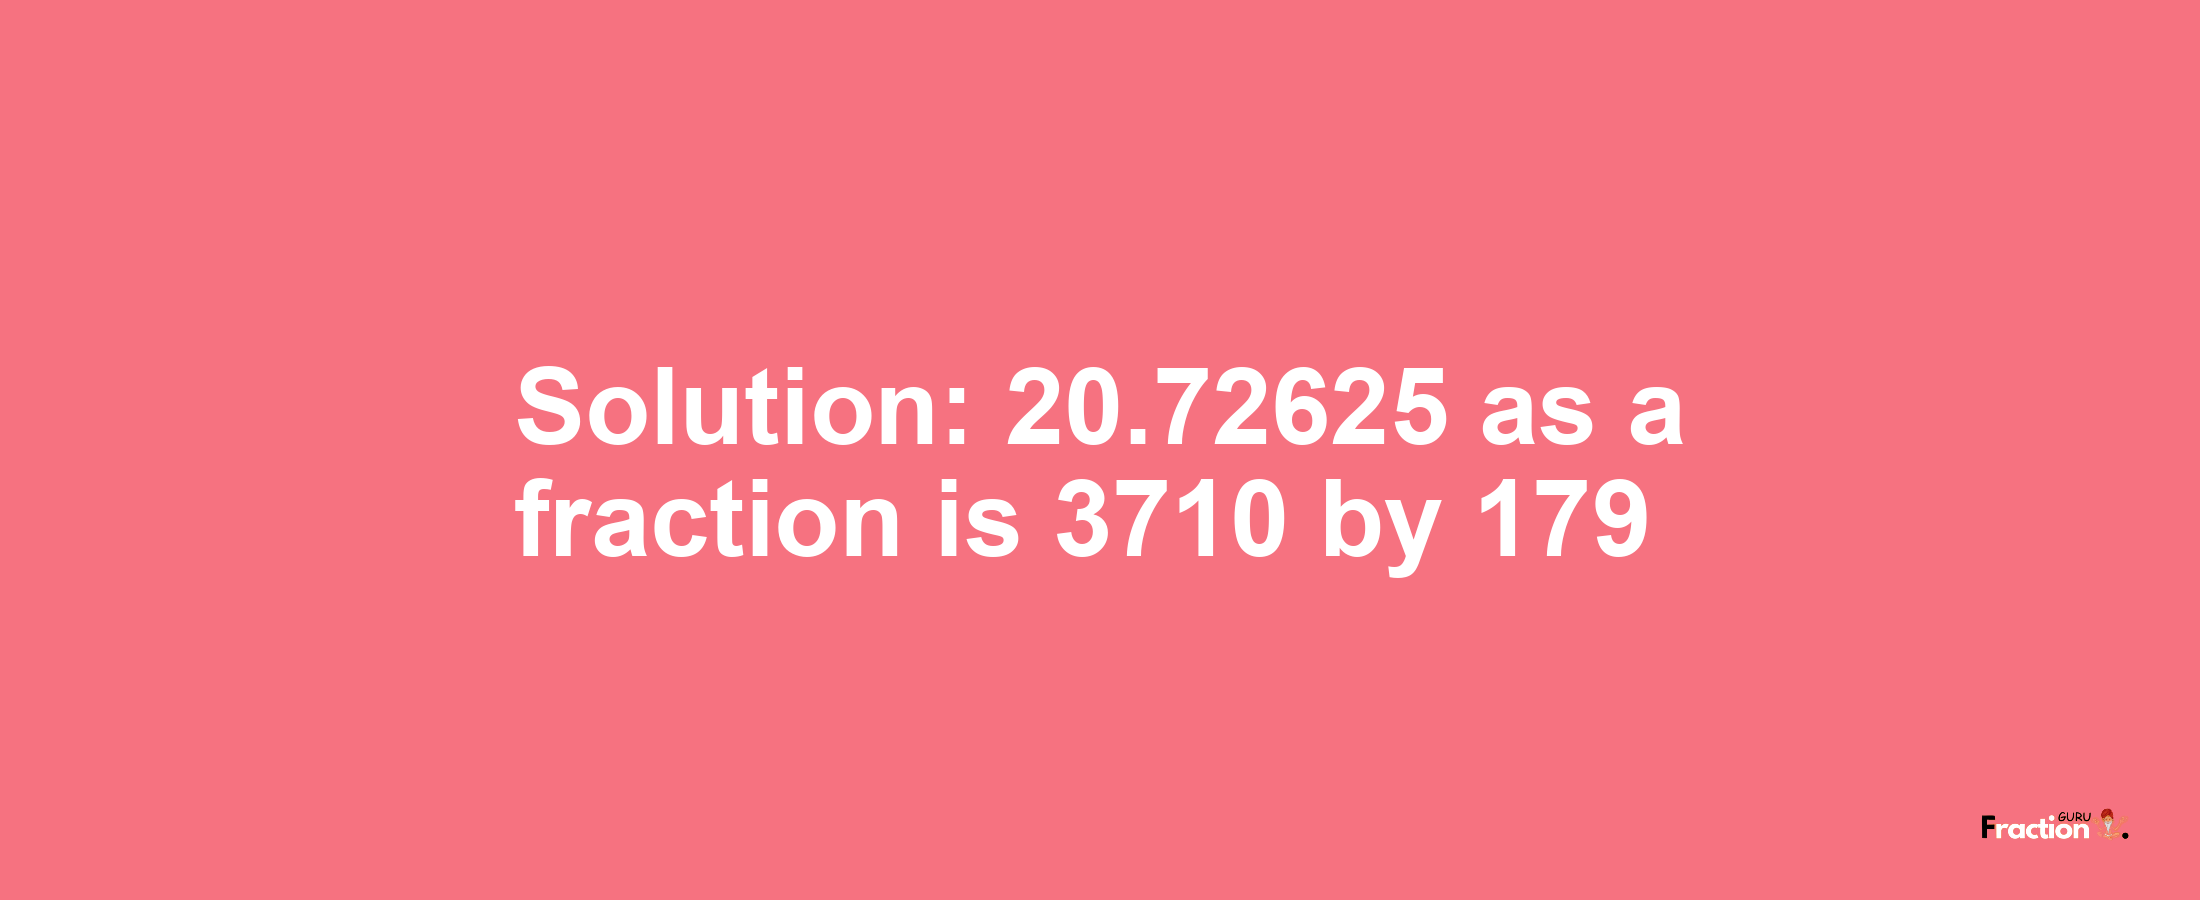 Solution:20.72625 as a fraction is 3710/179